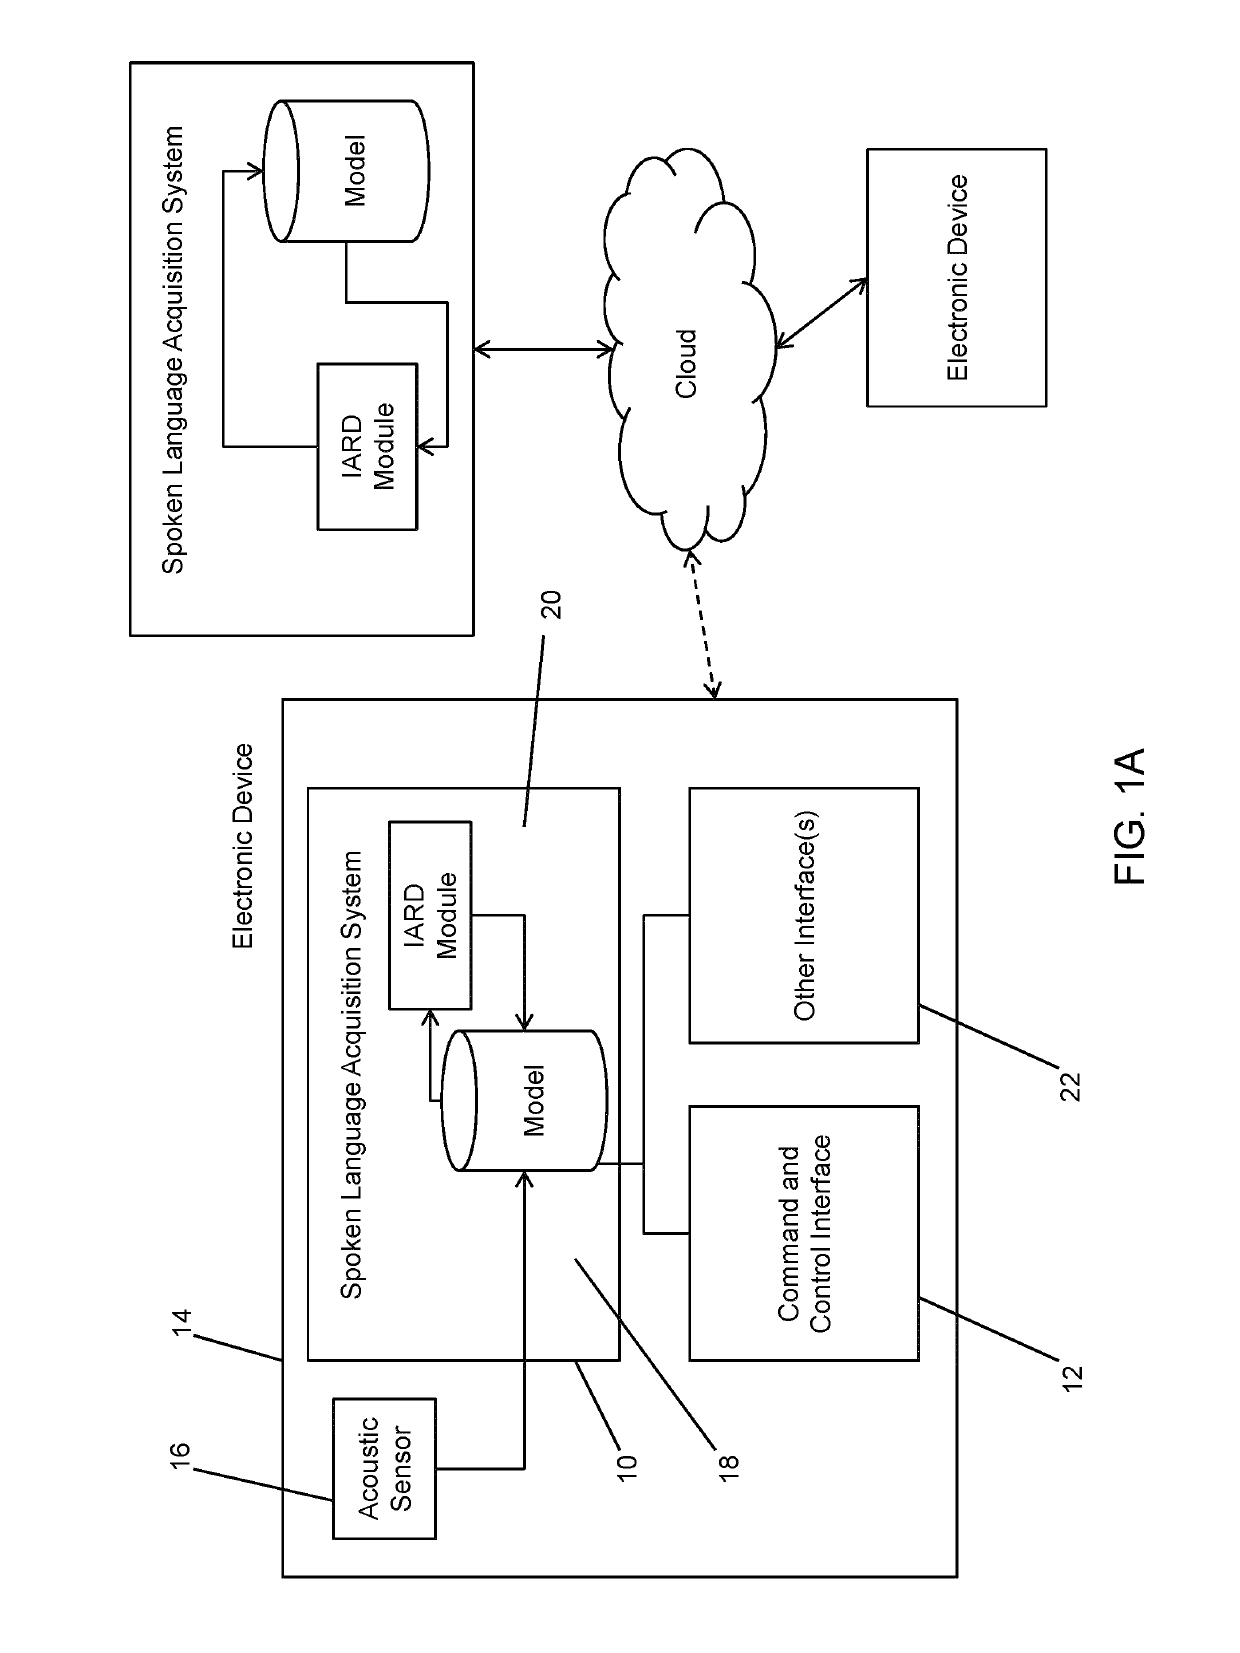 Method and device for automatically learning relevance of words in a speech recognition system